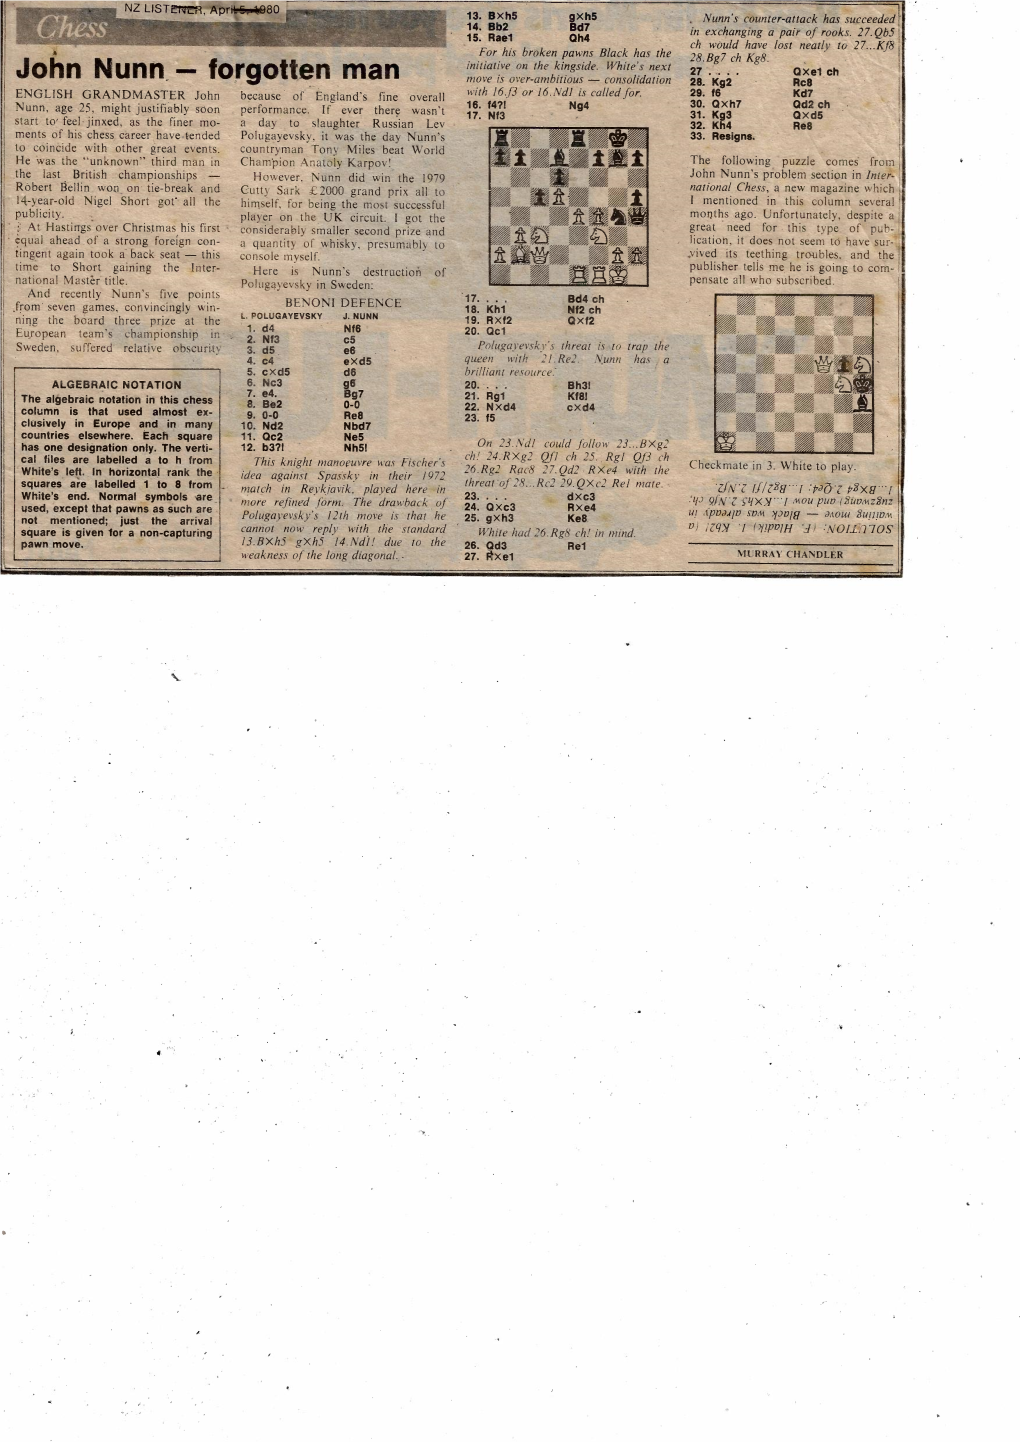 John Nunn's Problem Section in Inter• Robert Bellin Won on Tie-Break and Cutty Sark £2000 Grand Prix All to National Chess; a New Magazine Which